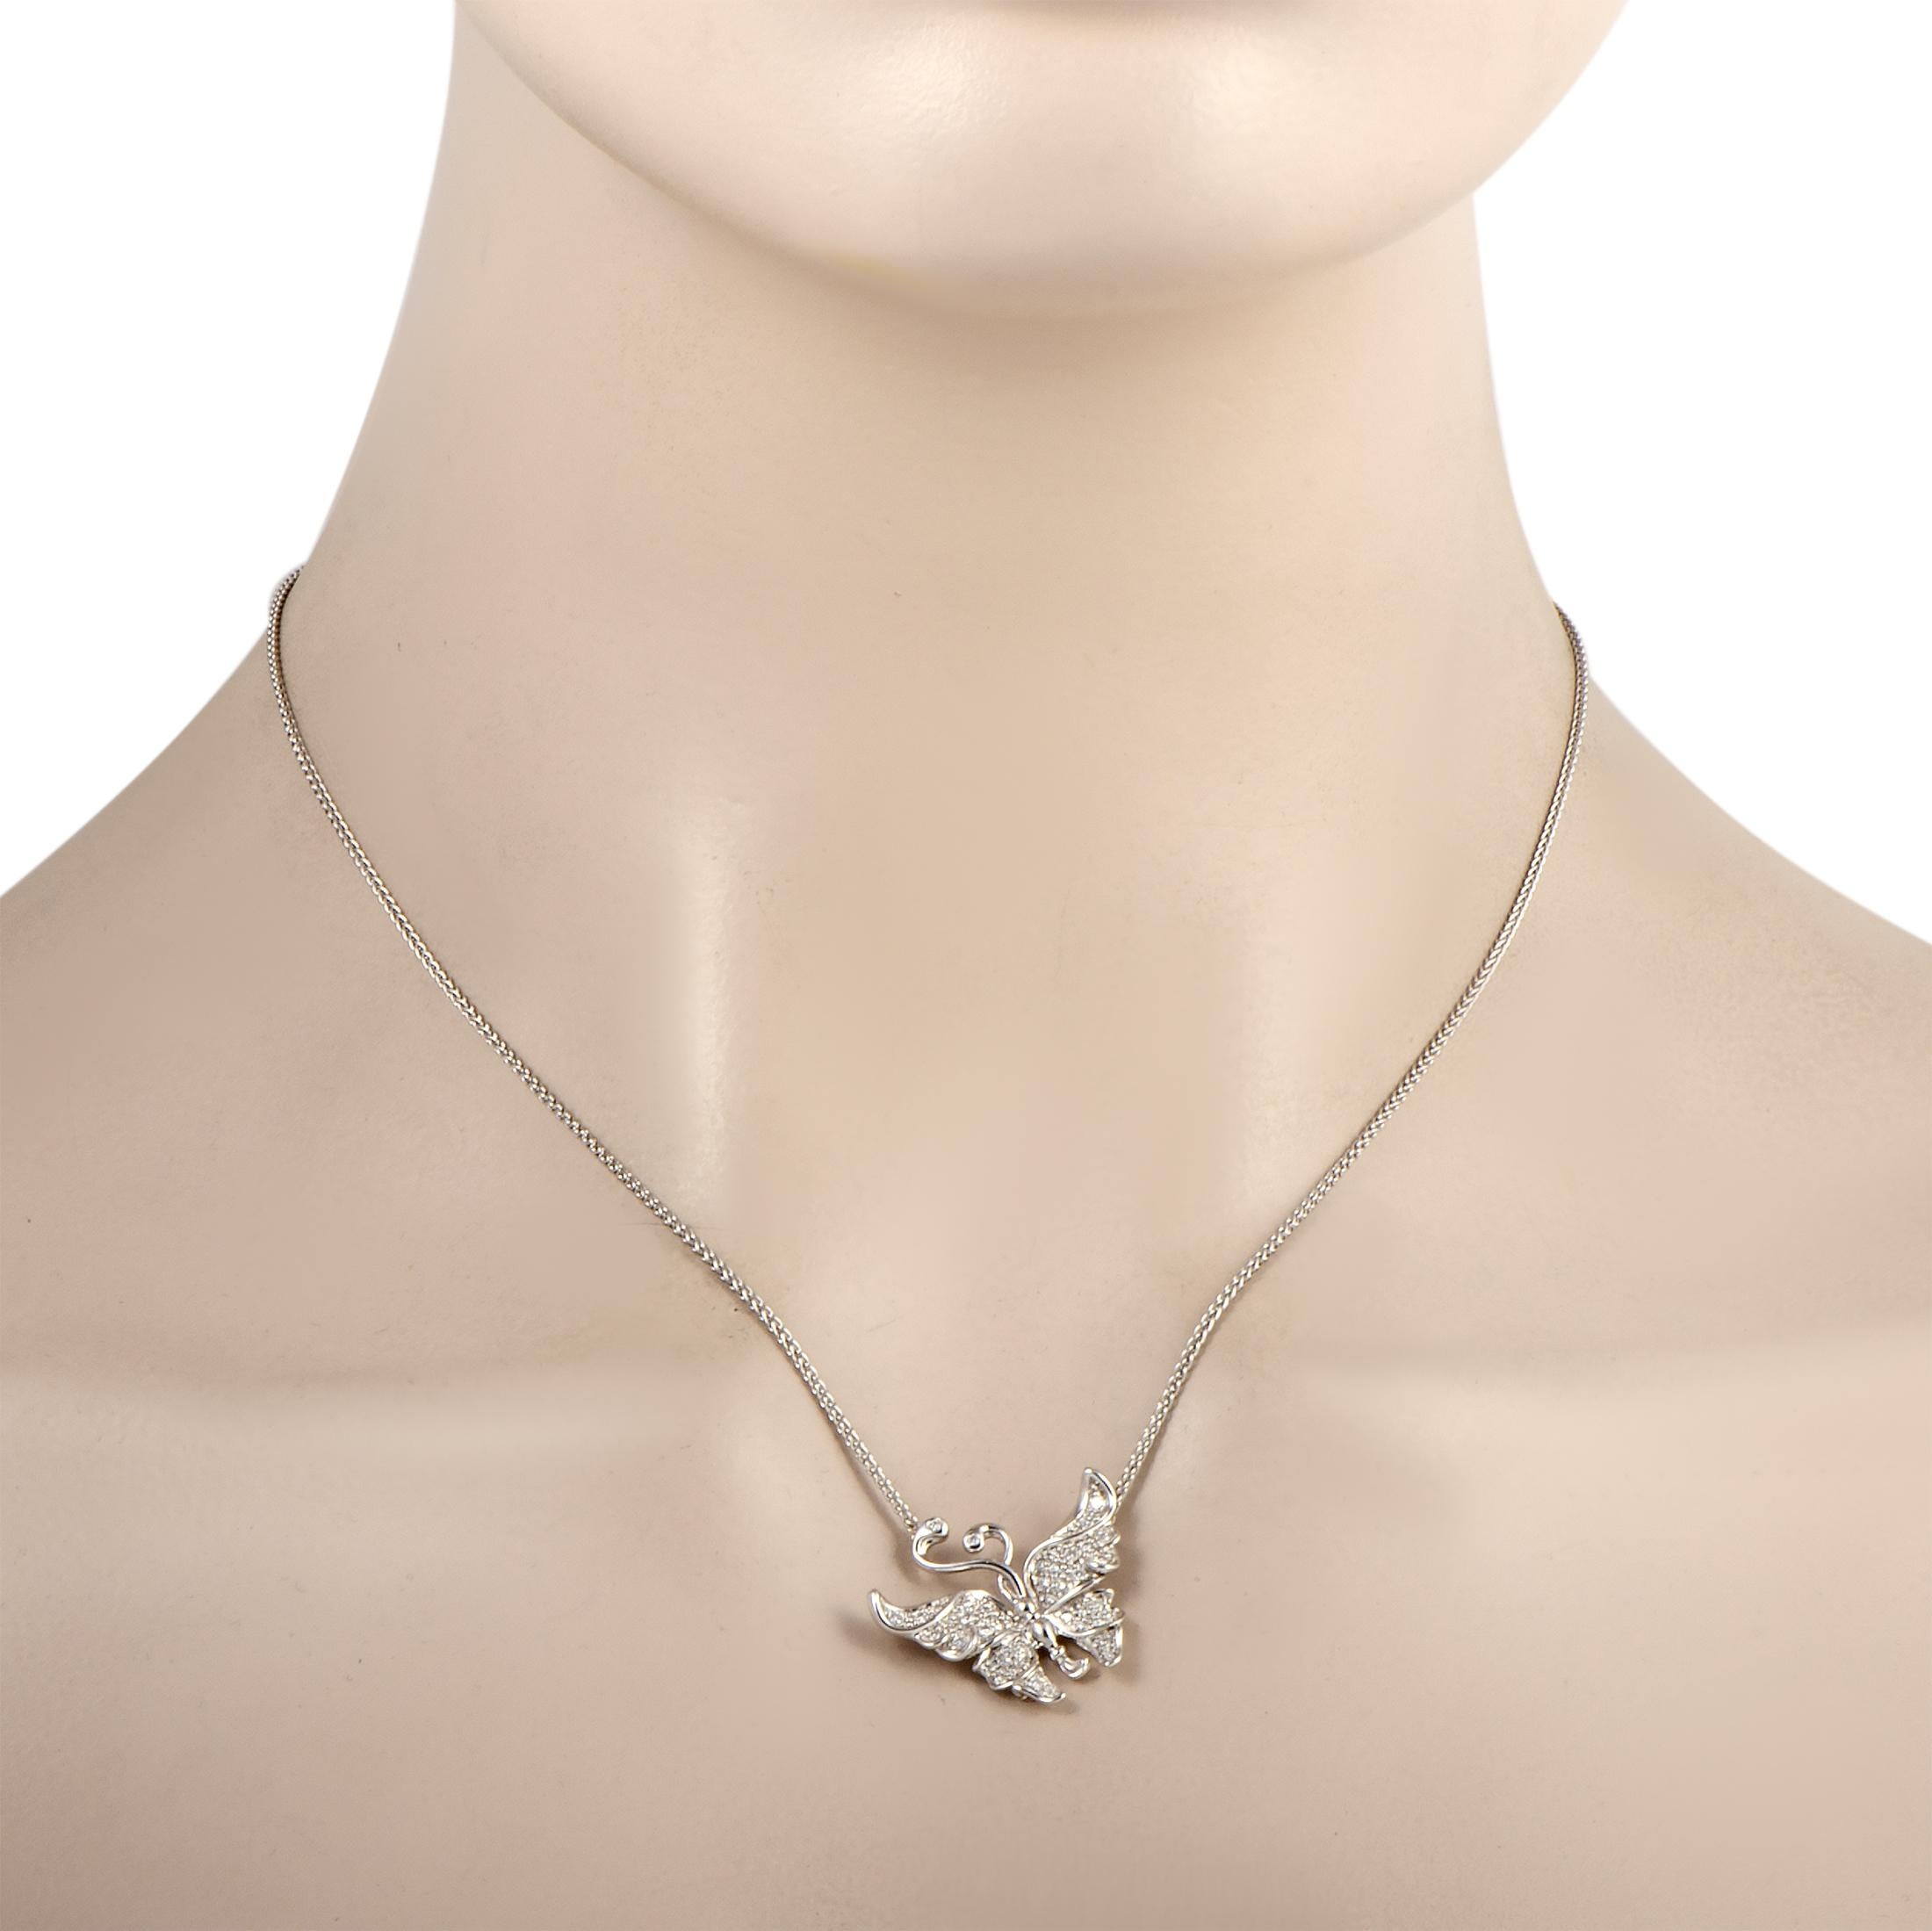 This Carrera y Carrera necklace is made out of 18K white gold and diamonds that amount to 0.37 carats. The necklace weighs 7.5 grams and is presented with a 17” chain, boasting a butterfly pendant that measures 0.50” in length and 1” in width.
 
